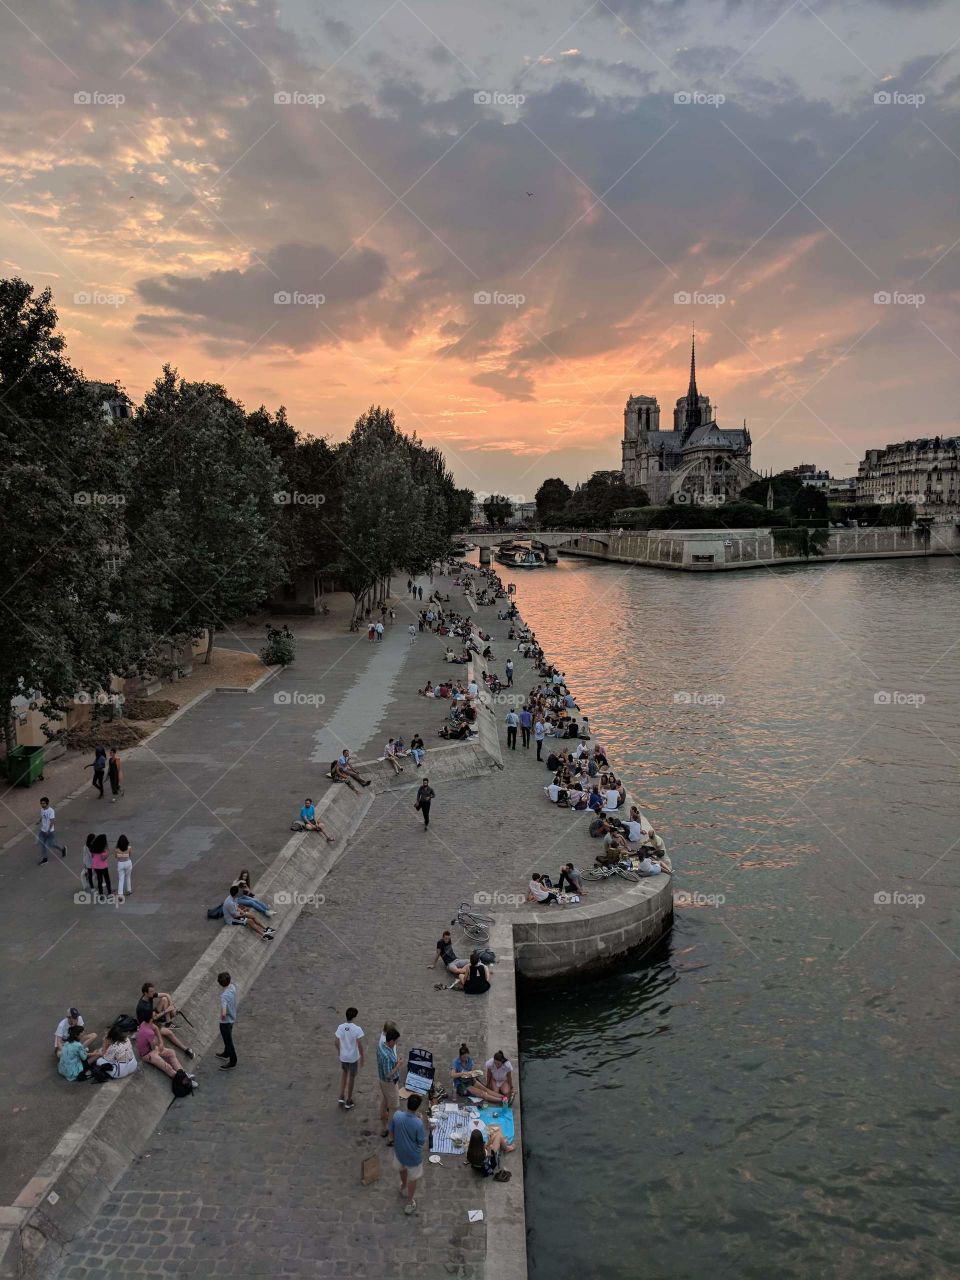 A normal evening in the romantic capital of France. Shows how their way of living is much more connected than many of us others